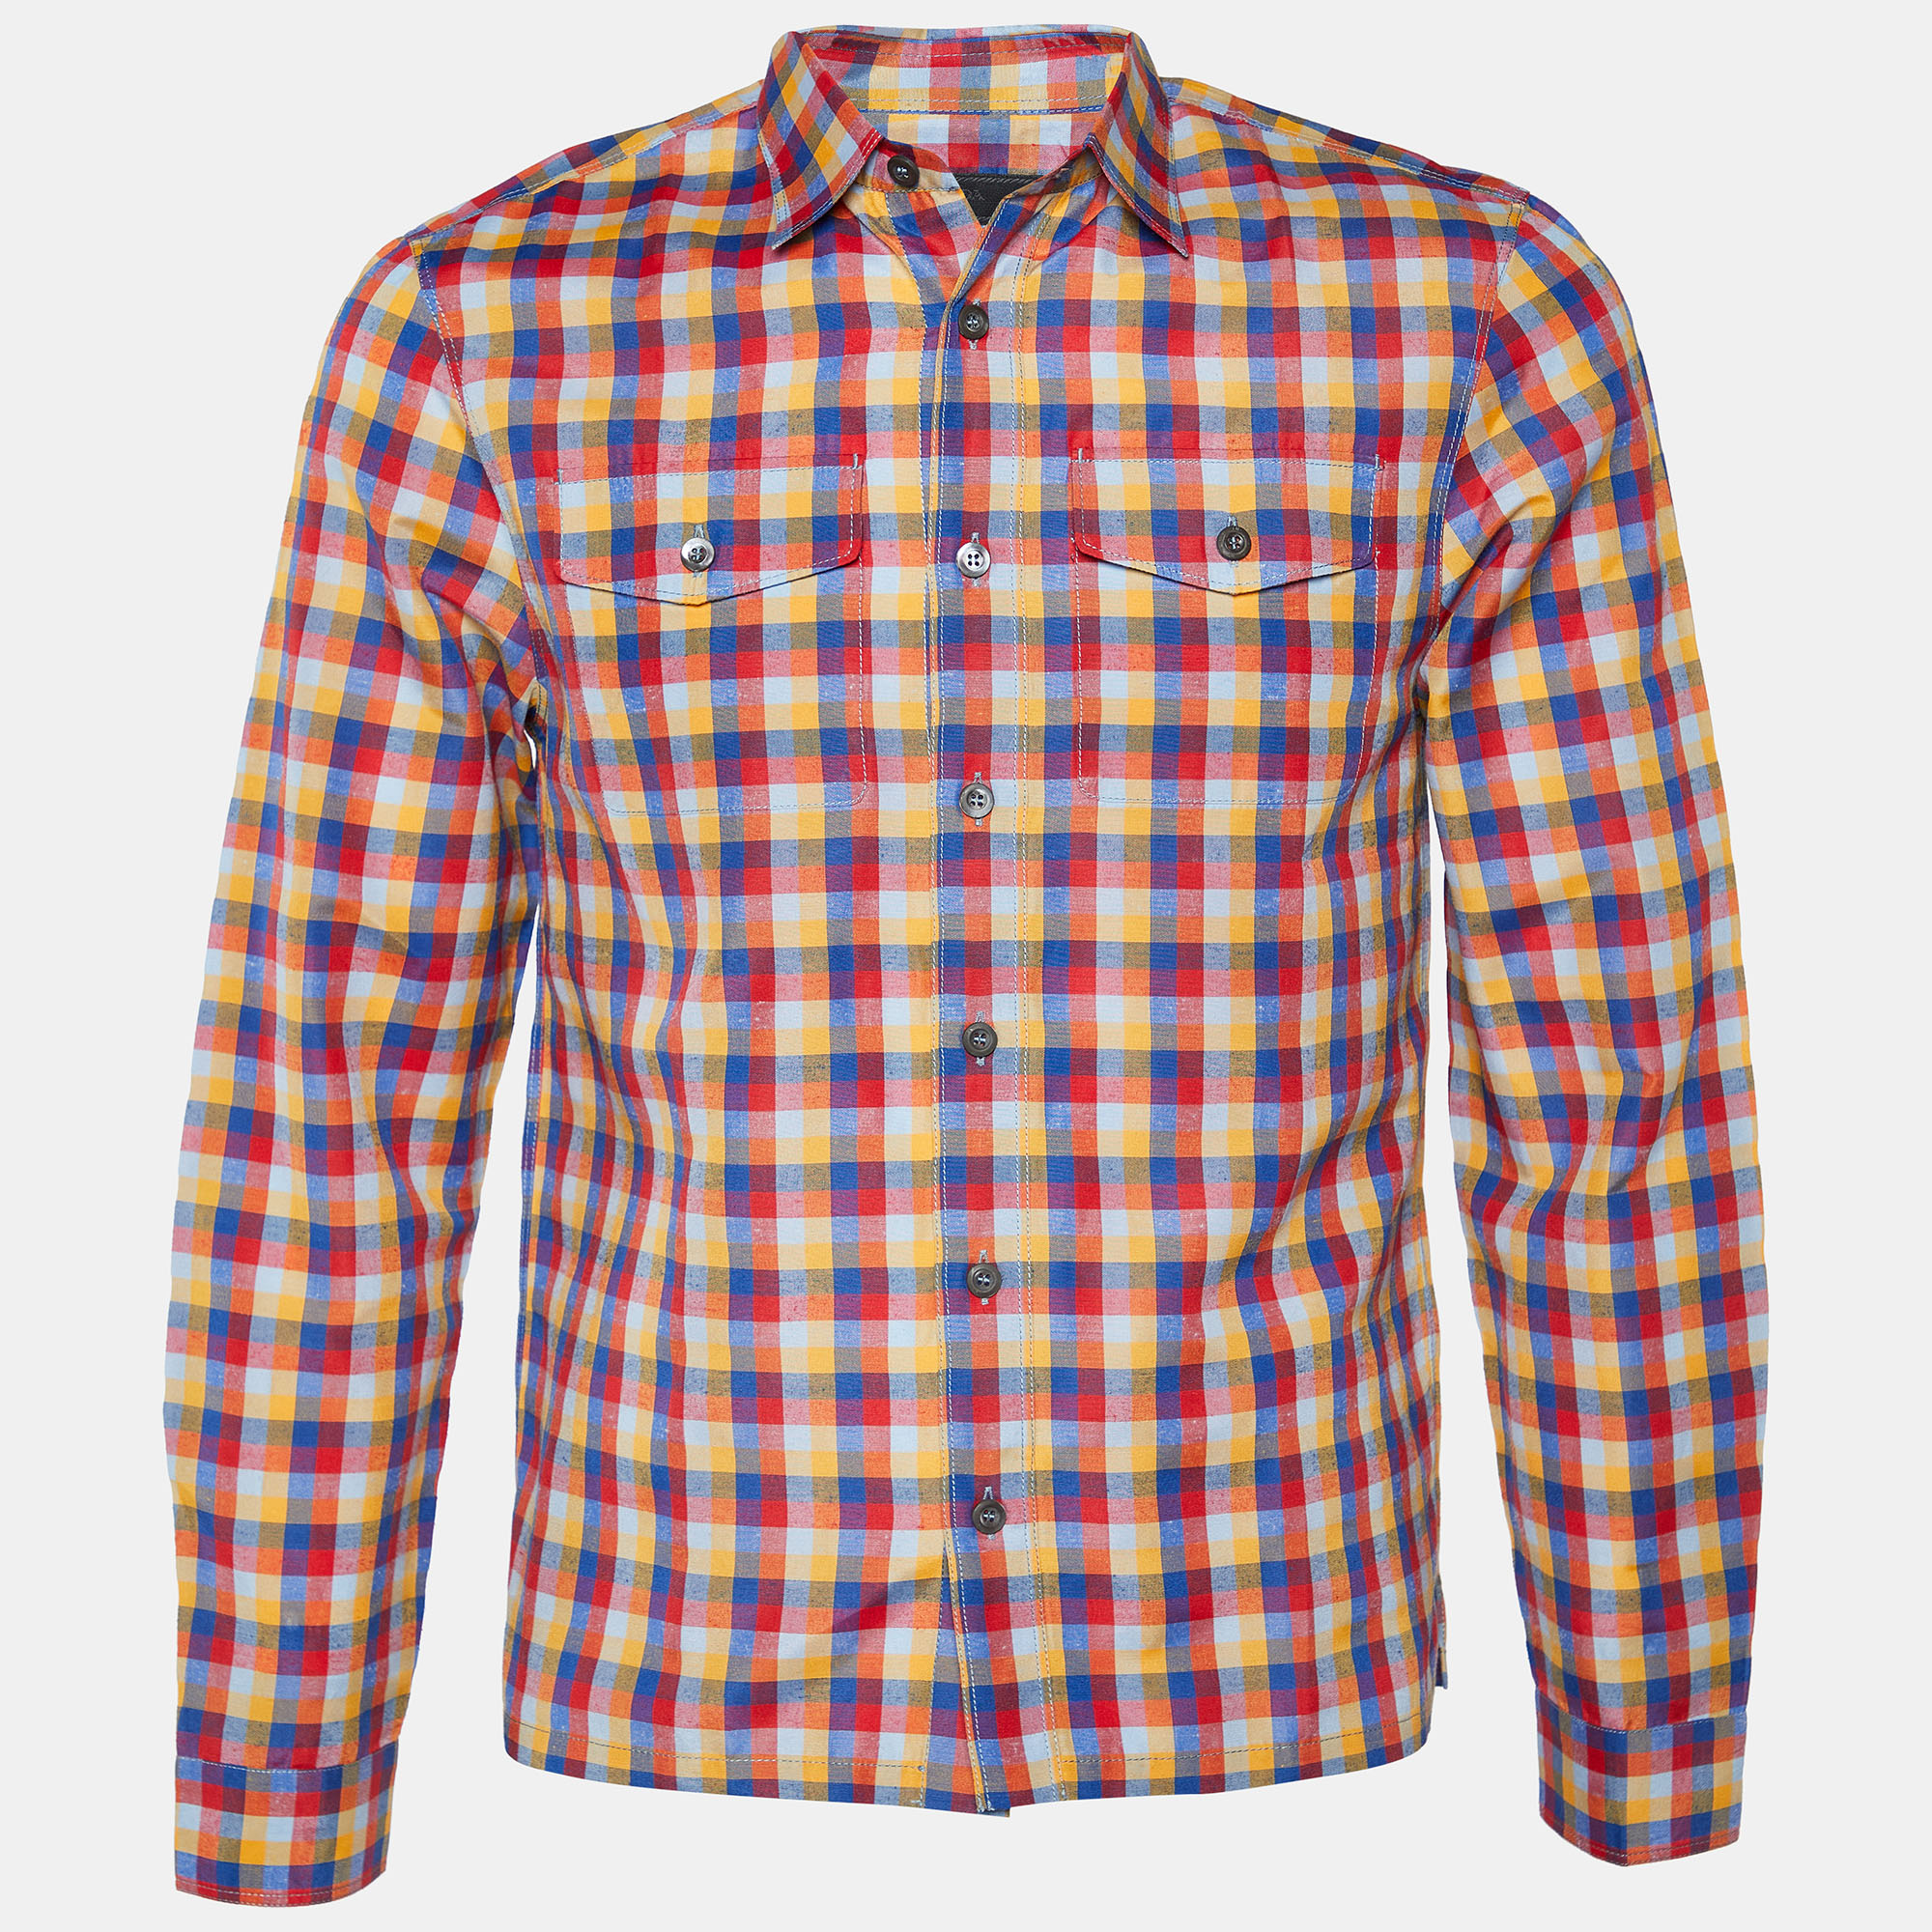 As shirts are an indispensable part of a wardrobe Prada brings you a creation that is both versatile and stylish. It has been tailored from high quality fabric for a classy look and fit.